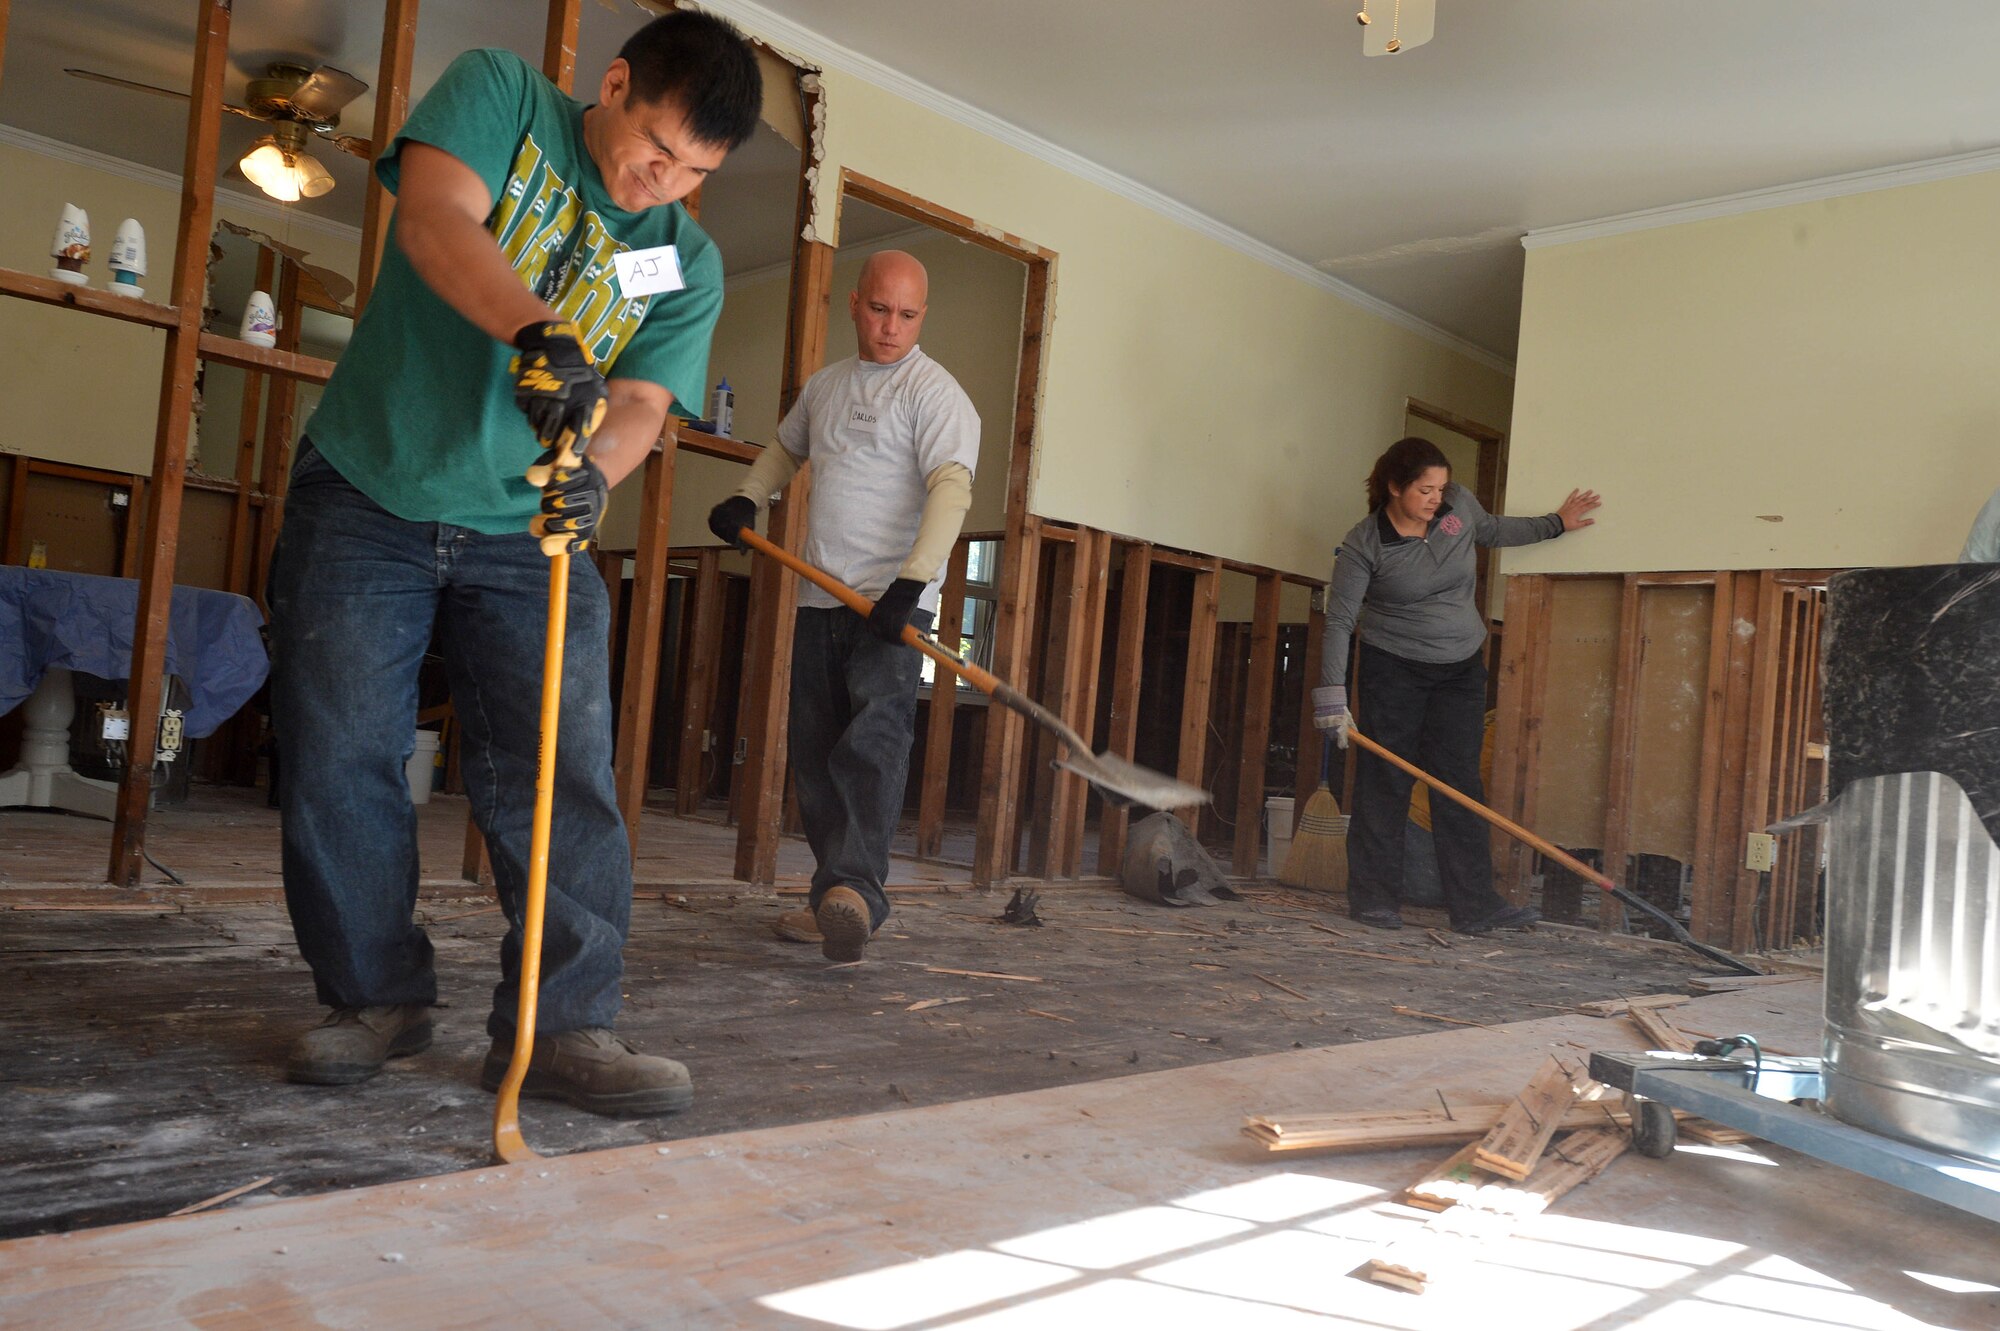 Two 20th Civil Engineer Squadron Airmen (left) and a disaster relief volunteer tear up wood floors at a home affected by the flooding in Sumter, S.C., Oct. 19, 2015. Organizations on Shaw Air Force Base, S.C., created multiple groups of more than 85 volunteers to assist in the disaster relief efforts for the Sumter community. (U.S. Air Force photo/Senior Airman Diana M. Cossaboom)